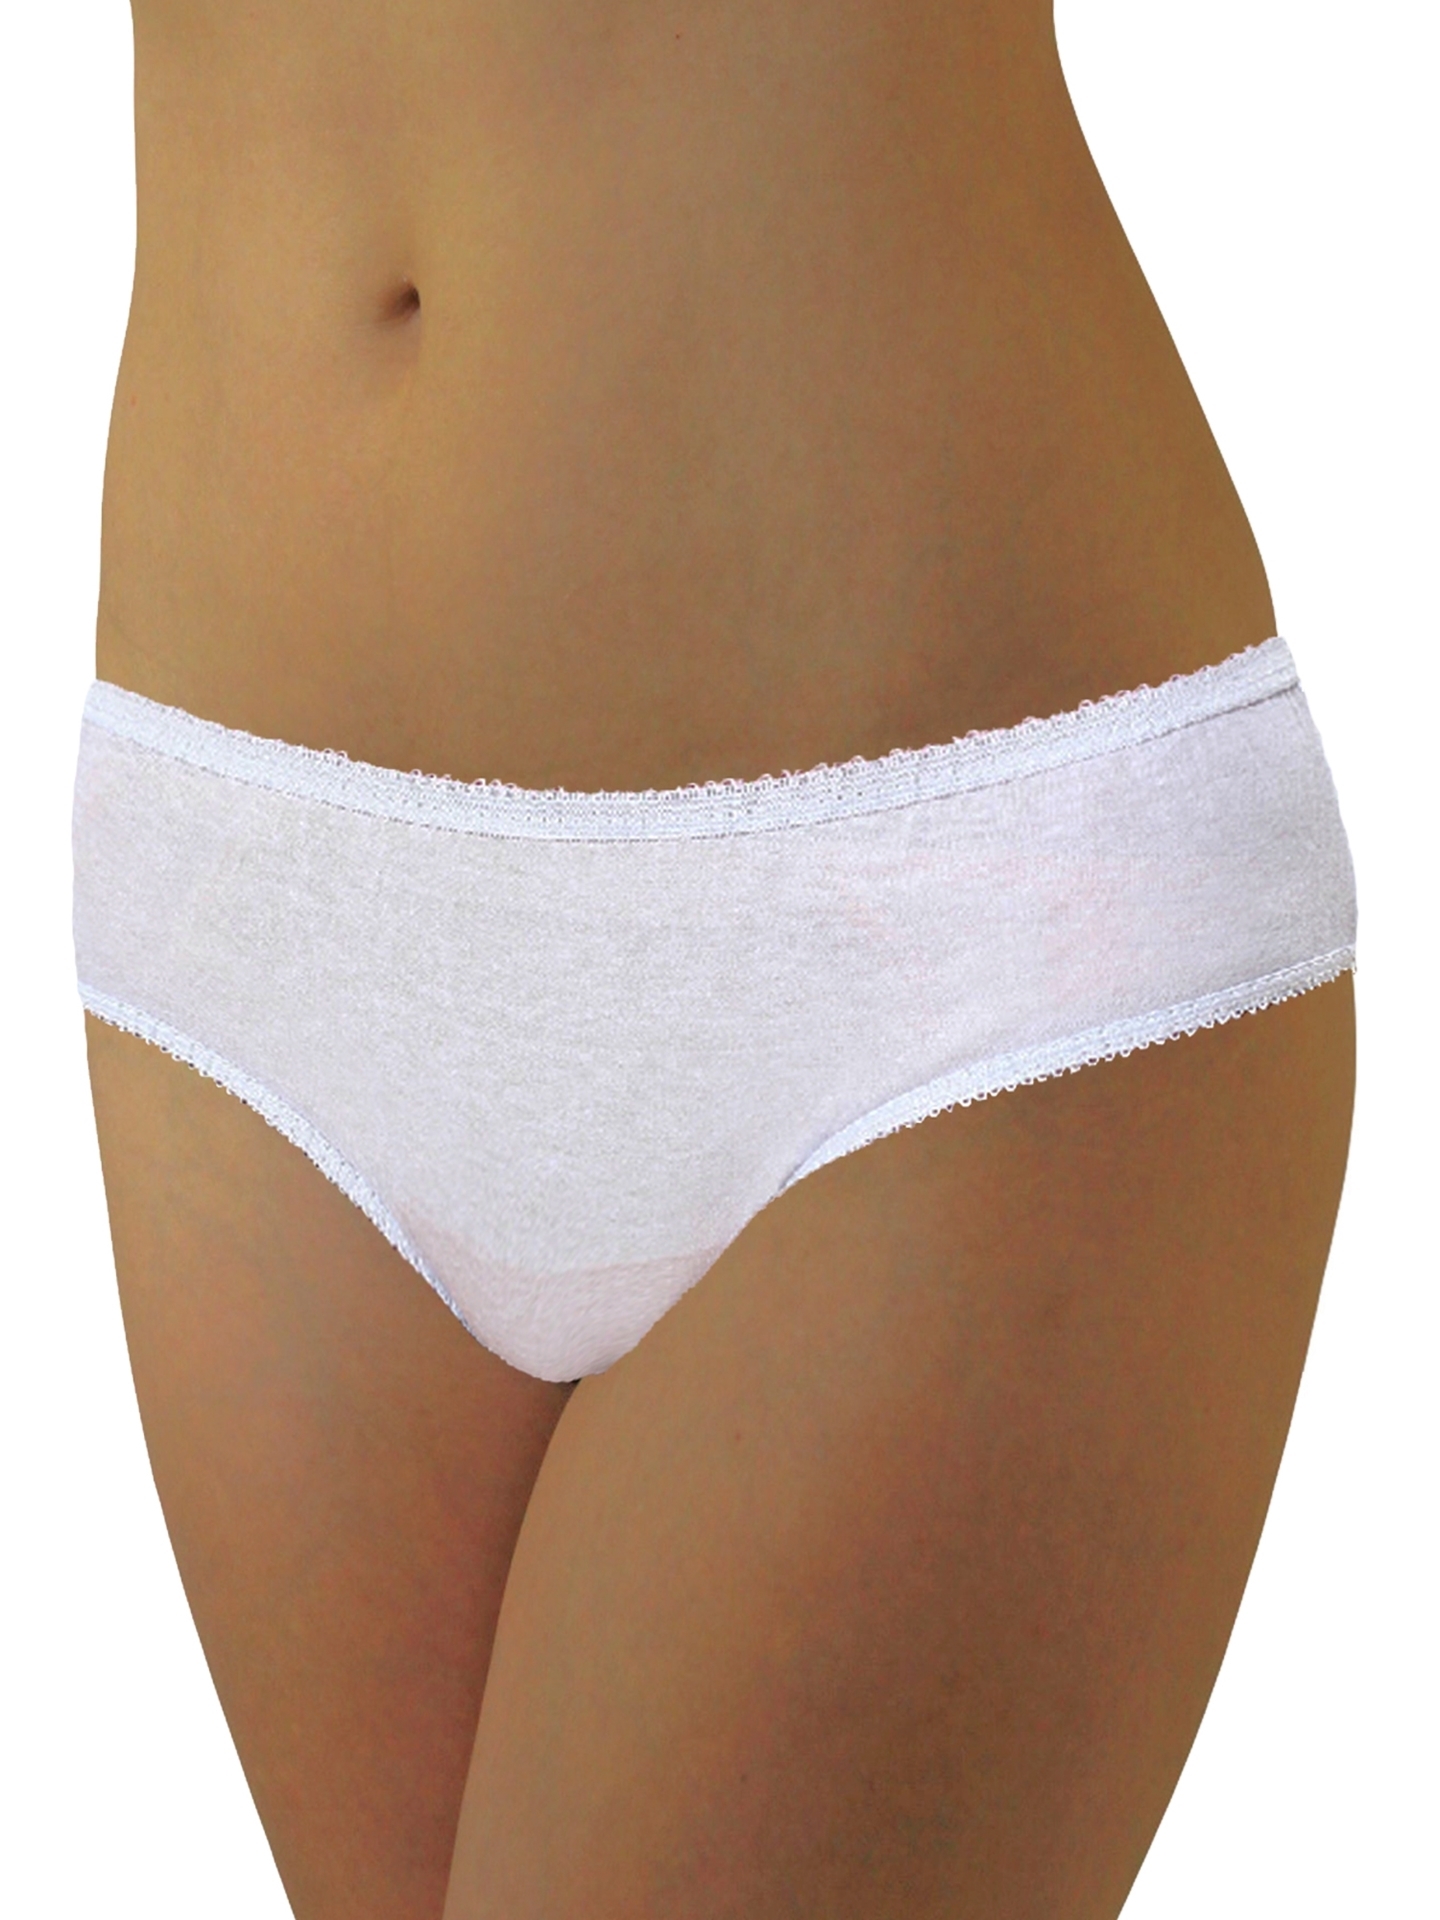 Trawee Disposable Underwear Antimicrobial Women Disposable White Panty